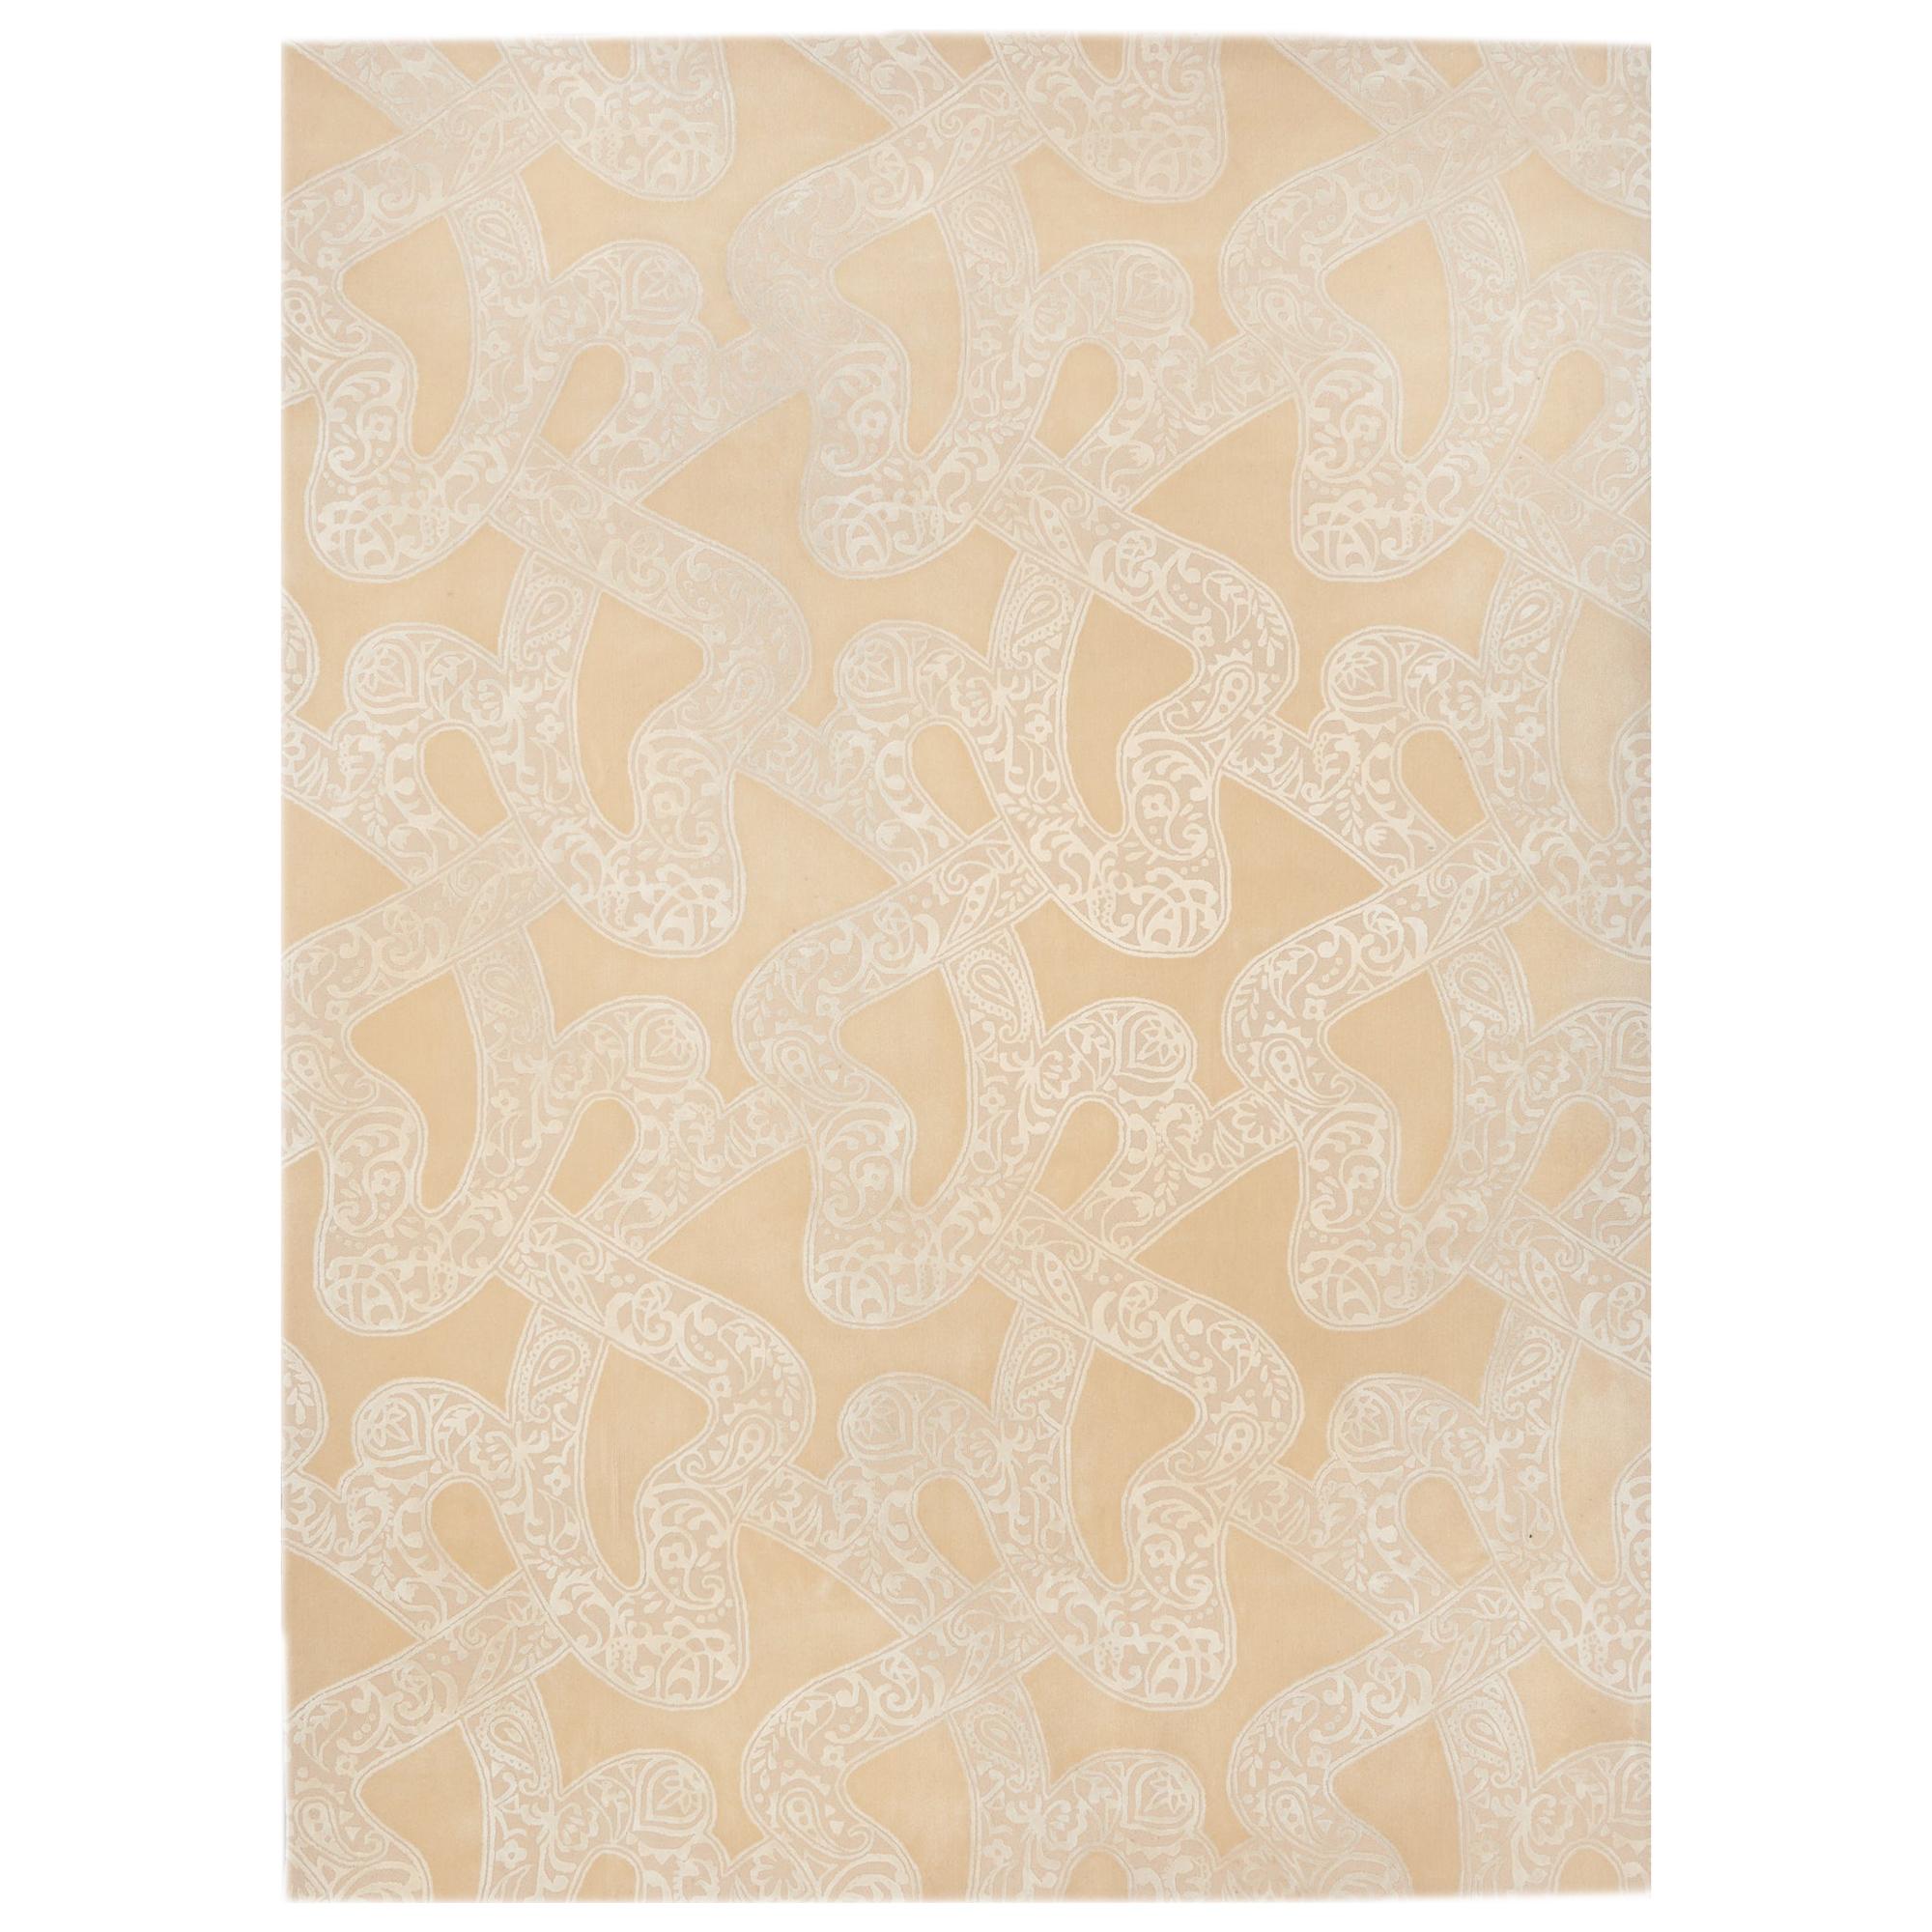 Schumacher Chantilly Lace Area Rug in Wool and Spun Silk, Patterson Flynn